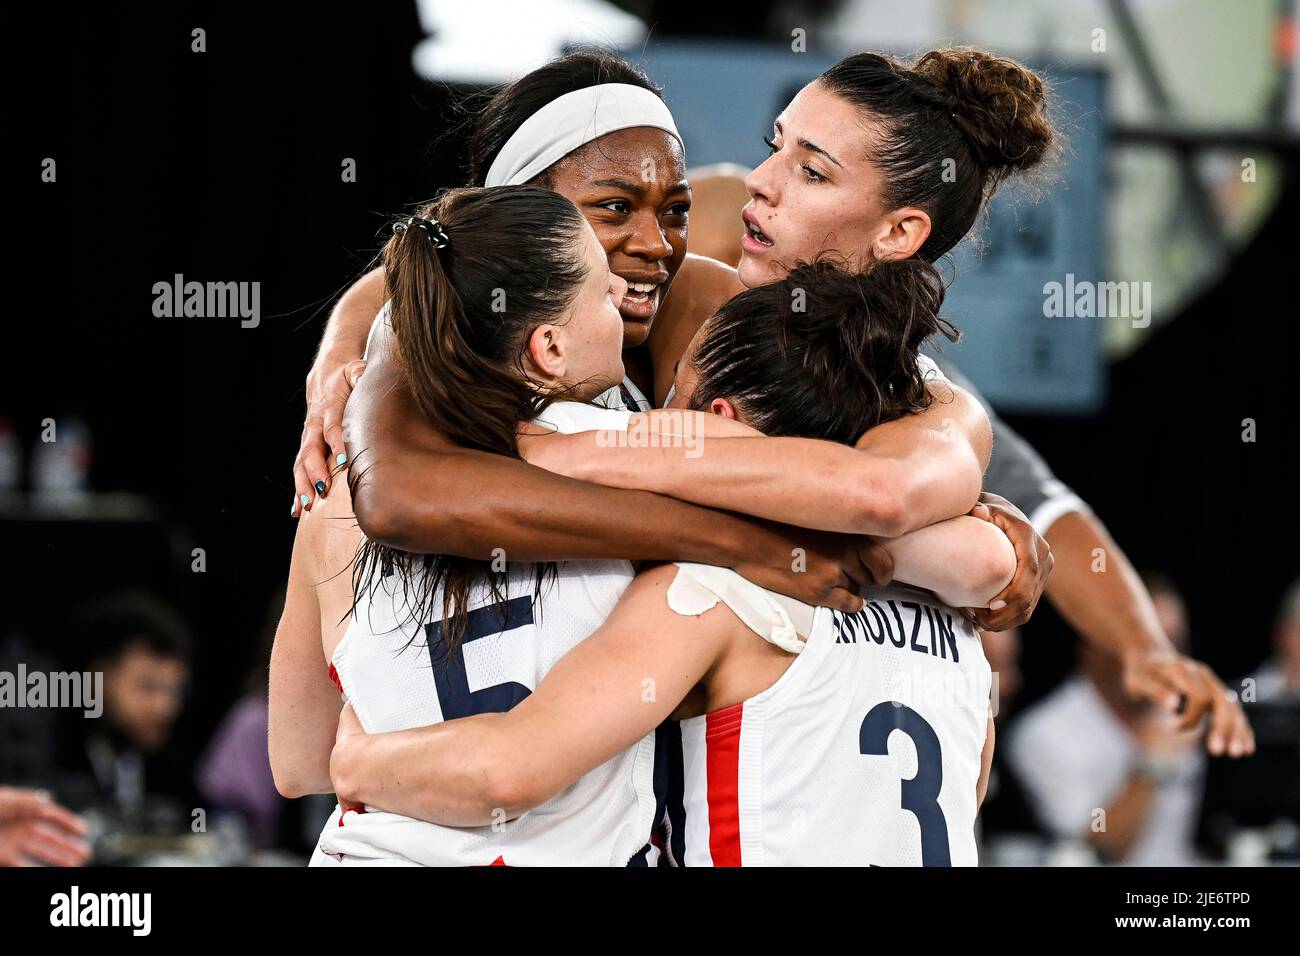 French Myriam Djekoundade and French Laetitia Guapo celebrate after winning a 3x3 basketball game between France and Spain, in the Women's quarter final round at the FIBA 2022 world cup, Saturday 25 June 2022, in Antwerp. The FIBA 3x3 Basket World Cup 2022 takes place from 21 to 26 June in Antwerp. BELGA PHOTO TOM GOYVAERTS Stock Photo